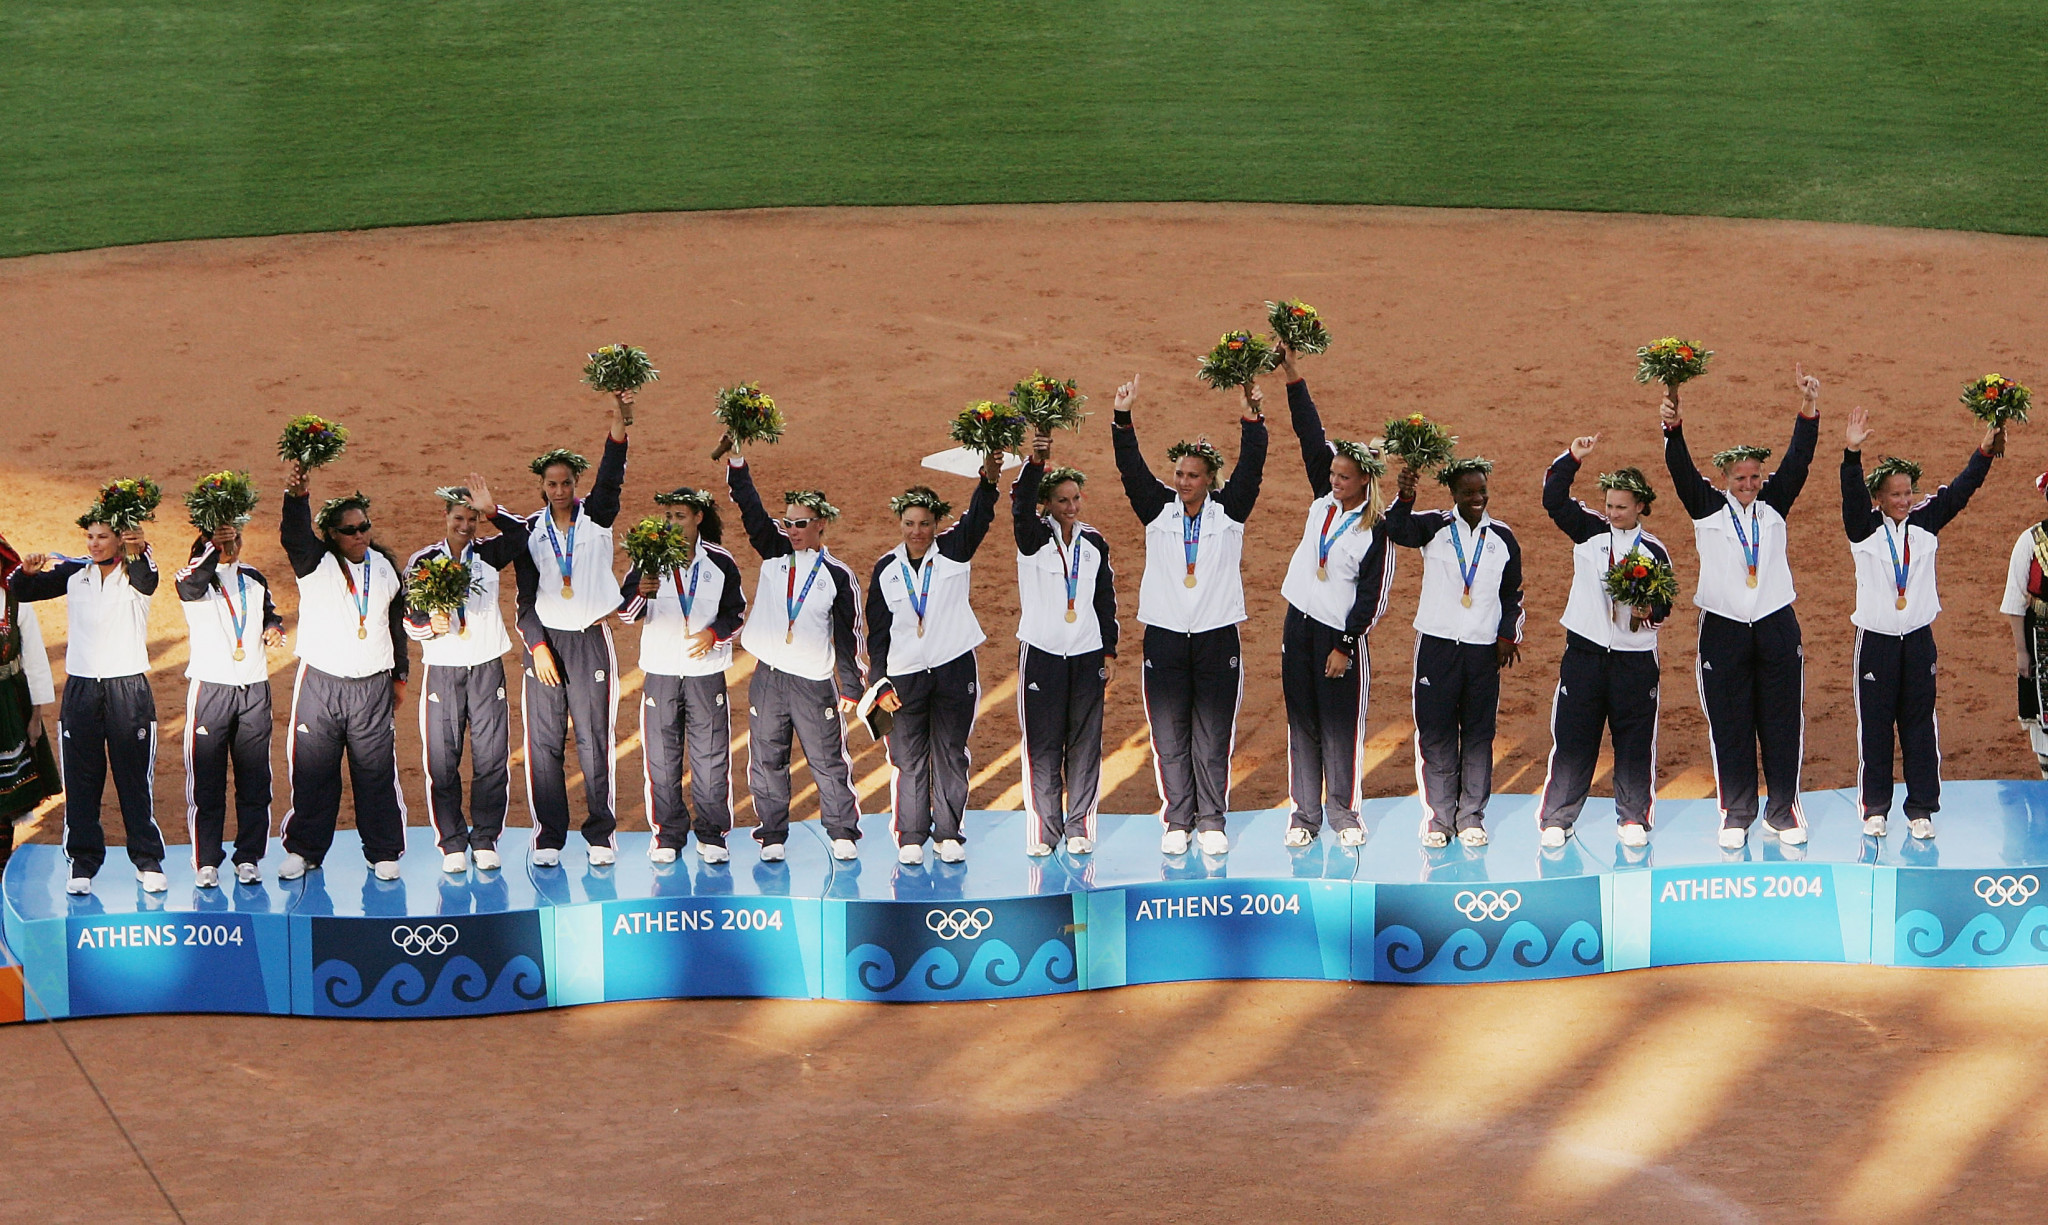 Cat Osterman was part of the US softball team which triumphed at Athens 2004 ©Getty Images